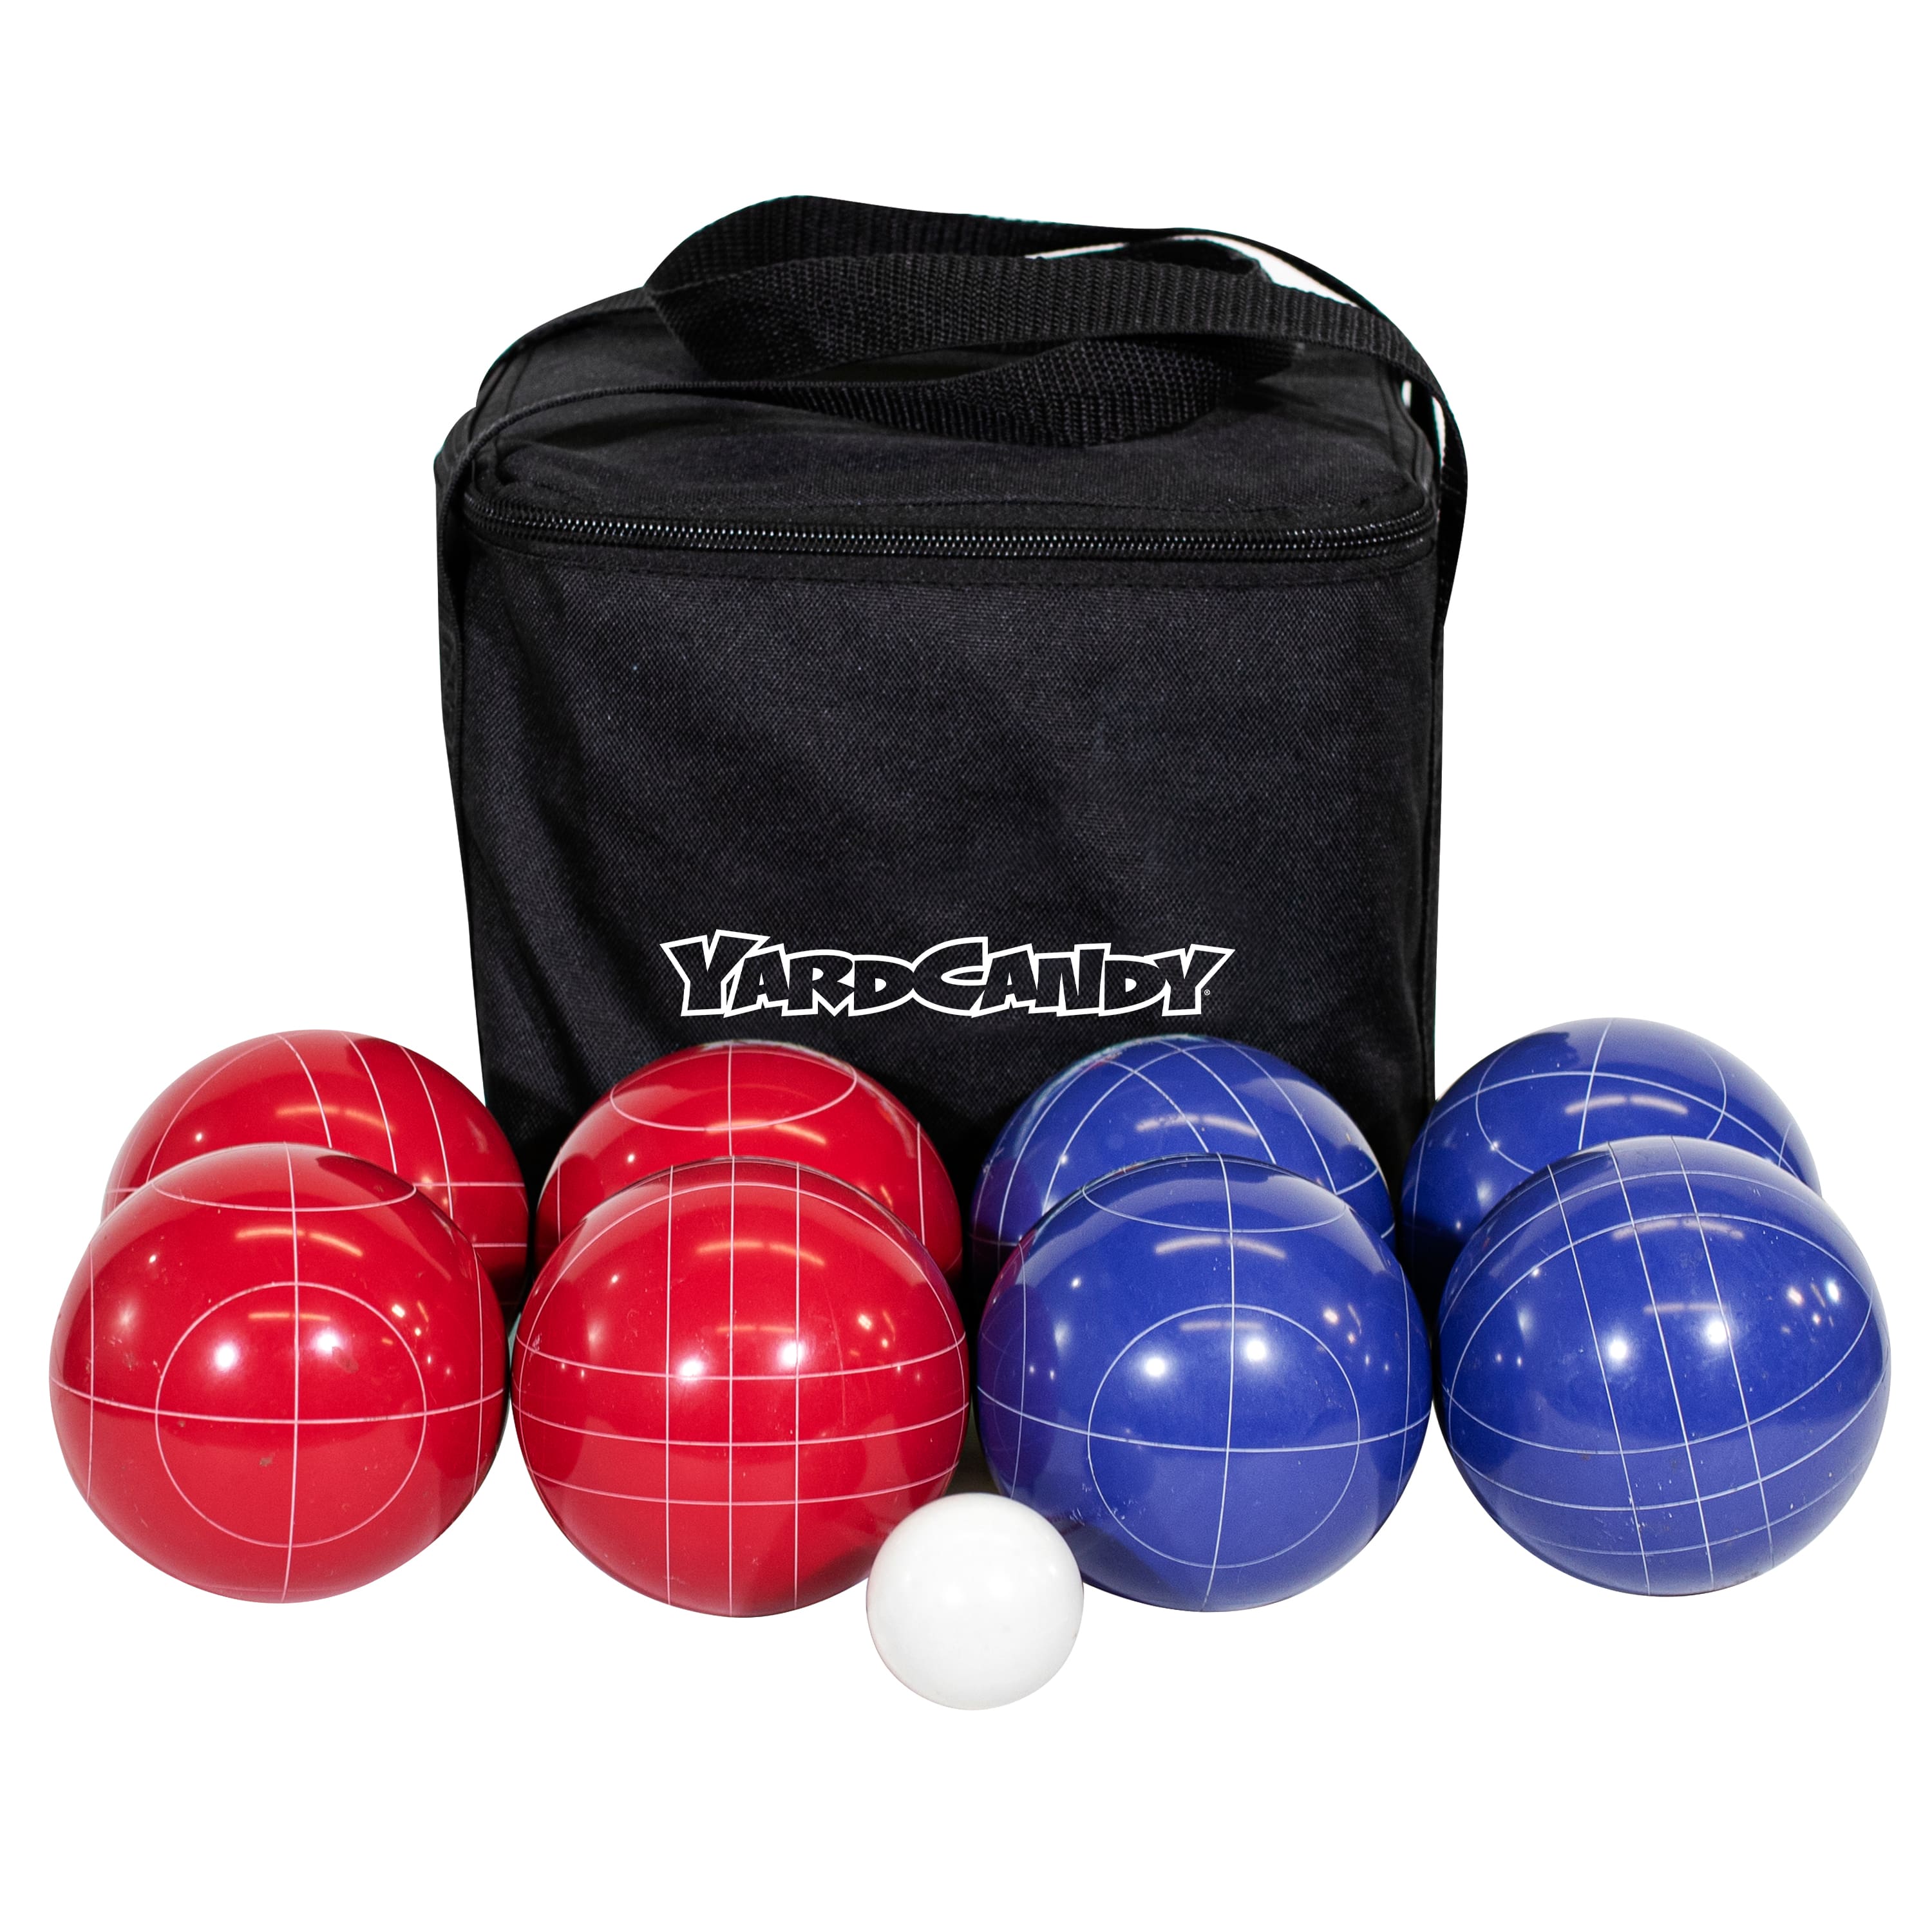 YardCandy Deluxe Bocce Ball Set with Carry Case